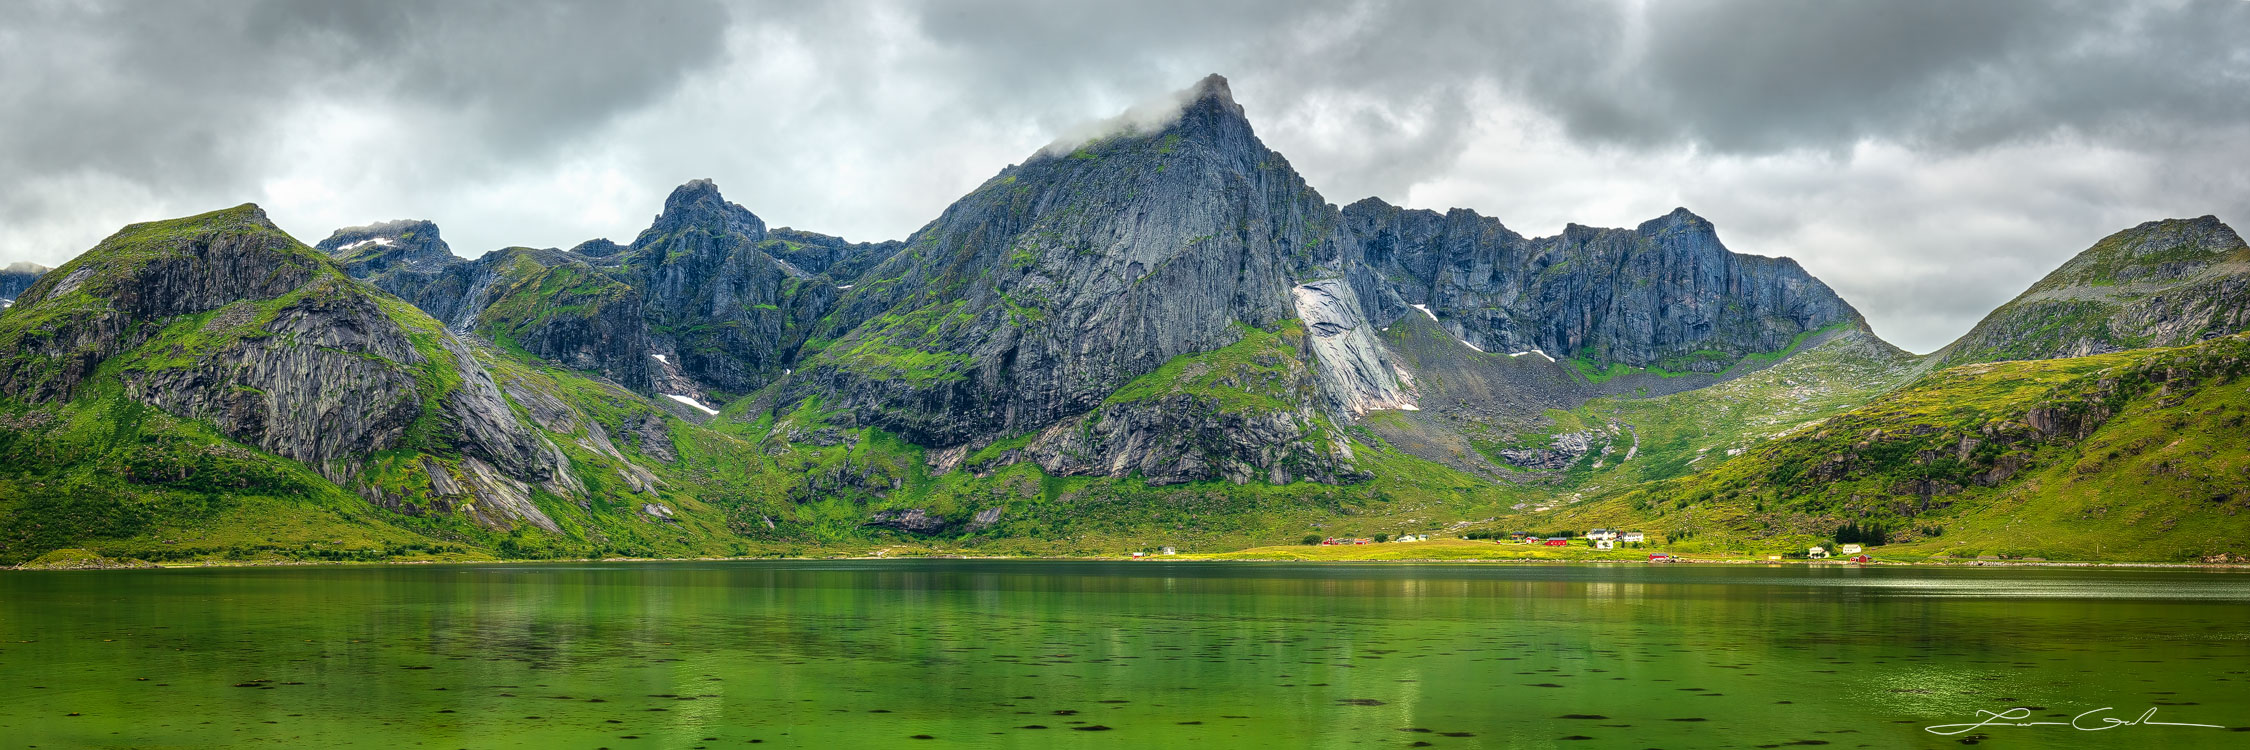 A jagged mountain rises above the sea water in the Lofoten Islands, Norway - Gintchin Fine Art